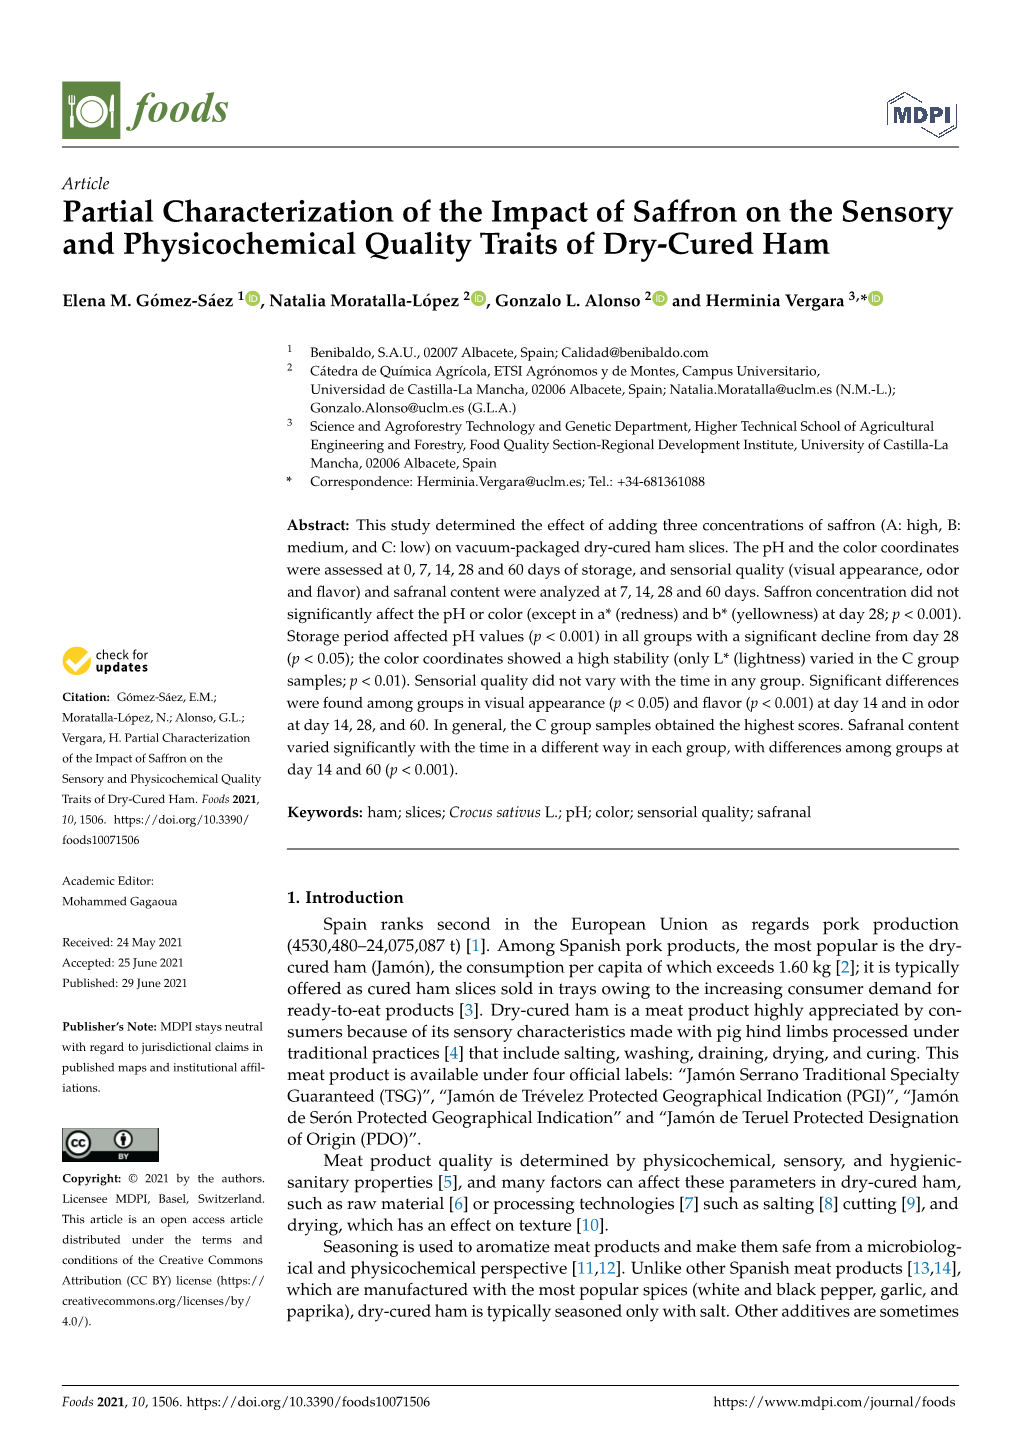 Partial Characterization of the Impact of Saffron on the Sensory and Physicochemical Quality Traits of Dry-Cured Ham